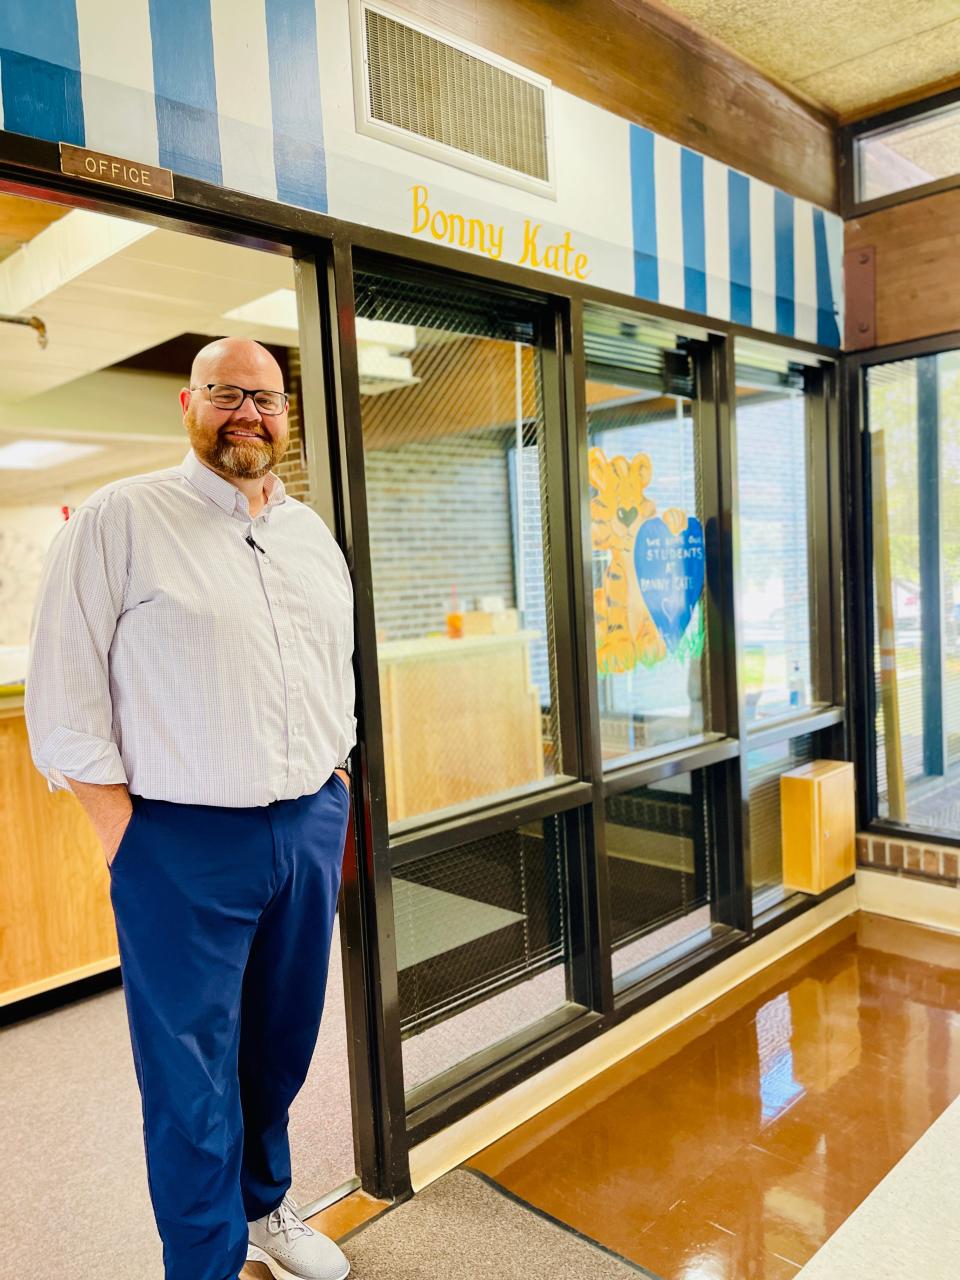 “I have piloted a number of things,” said new Bonny Kate Elementary principal Rocky Riley. “In 2001 I was the first true robotics and engineering teacher and went to Knox County Schools’ central office at a young age. I decided to leave central office to be back around kids. I think that is my calling."